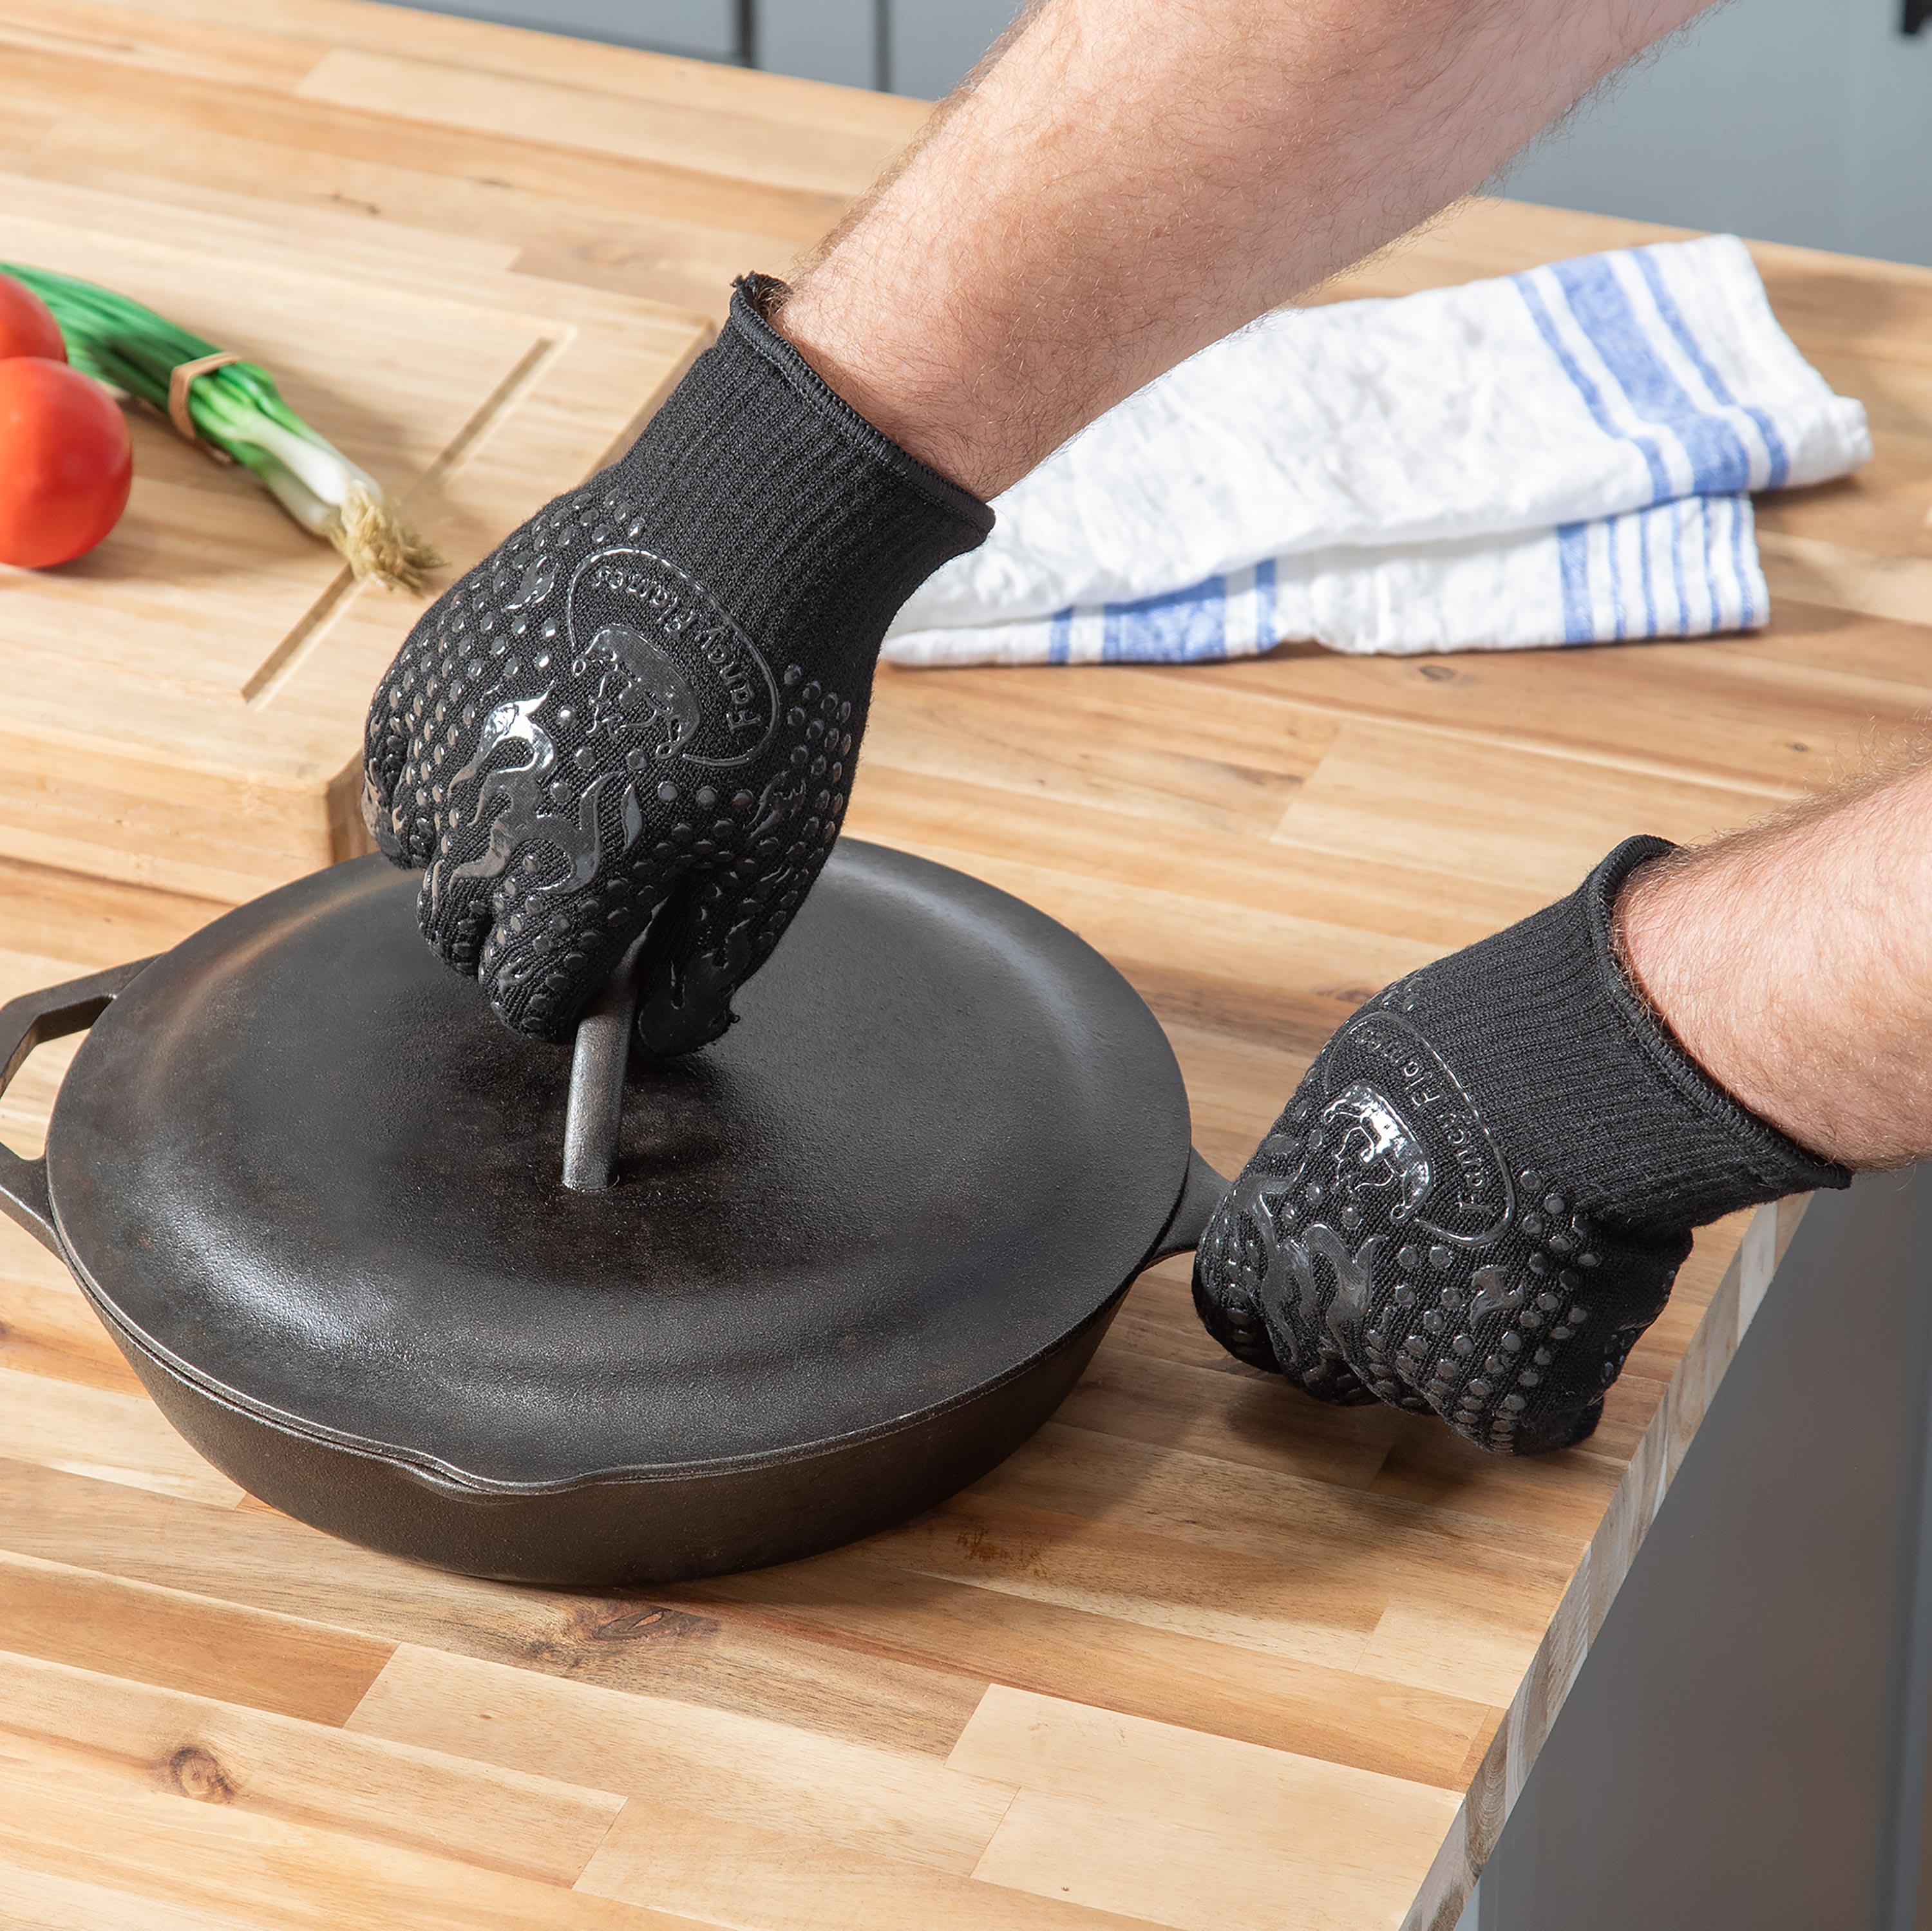 Pair of Heat-Resistant BBQ Gloves